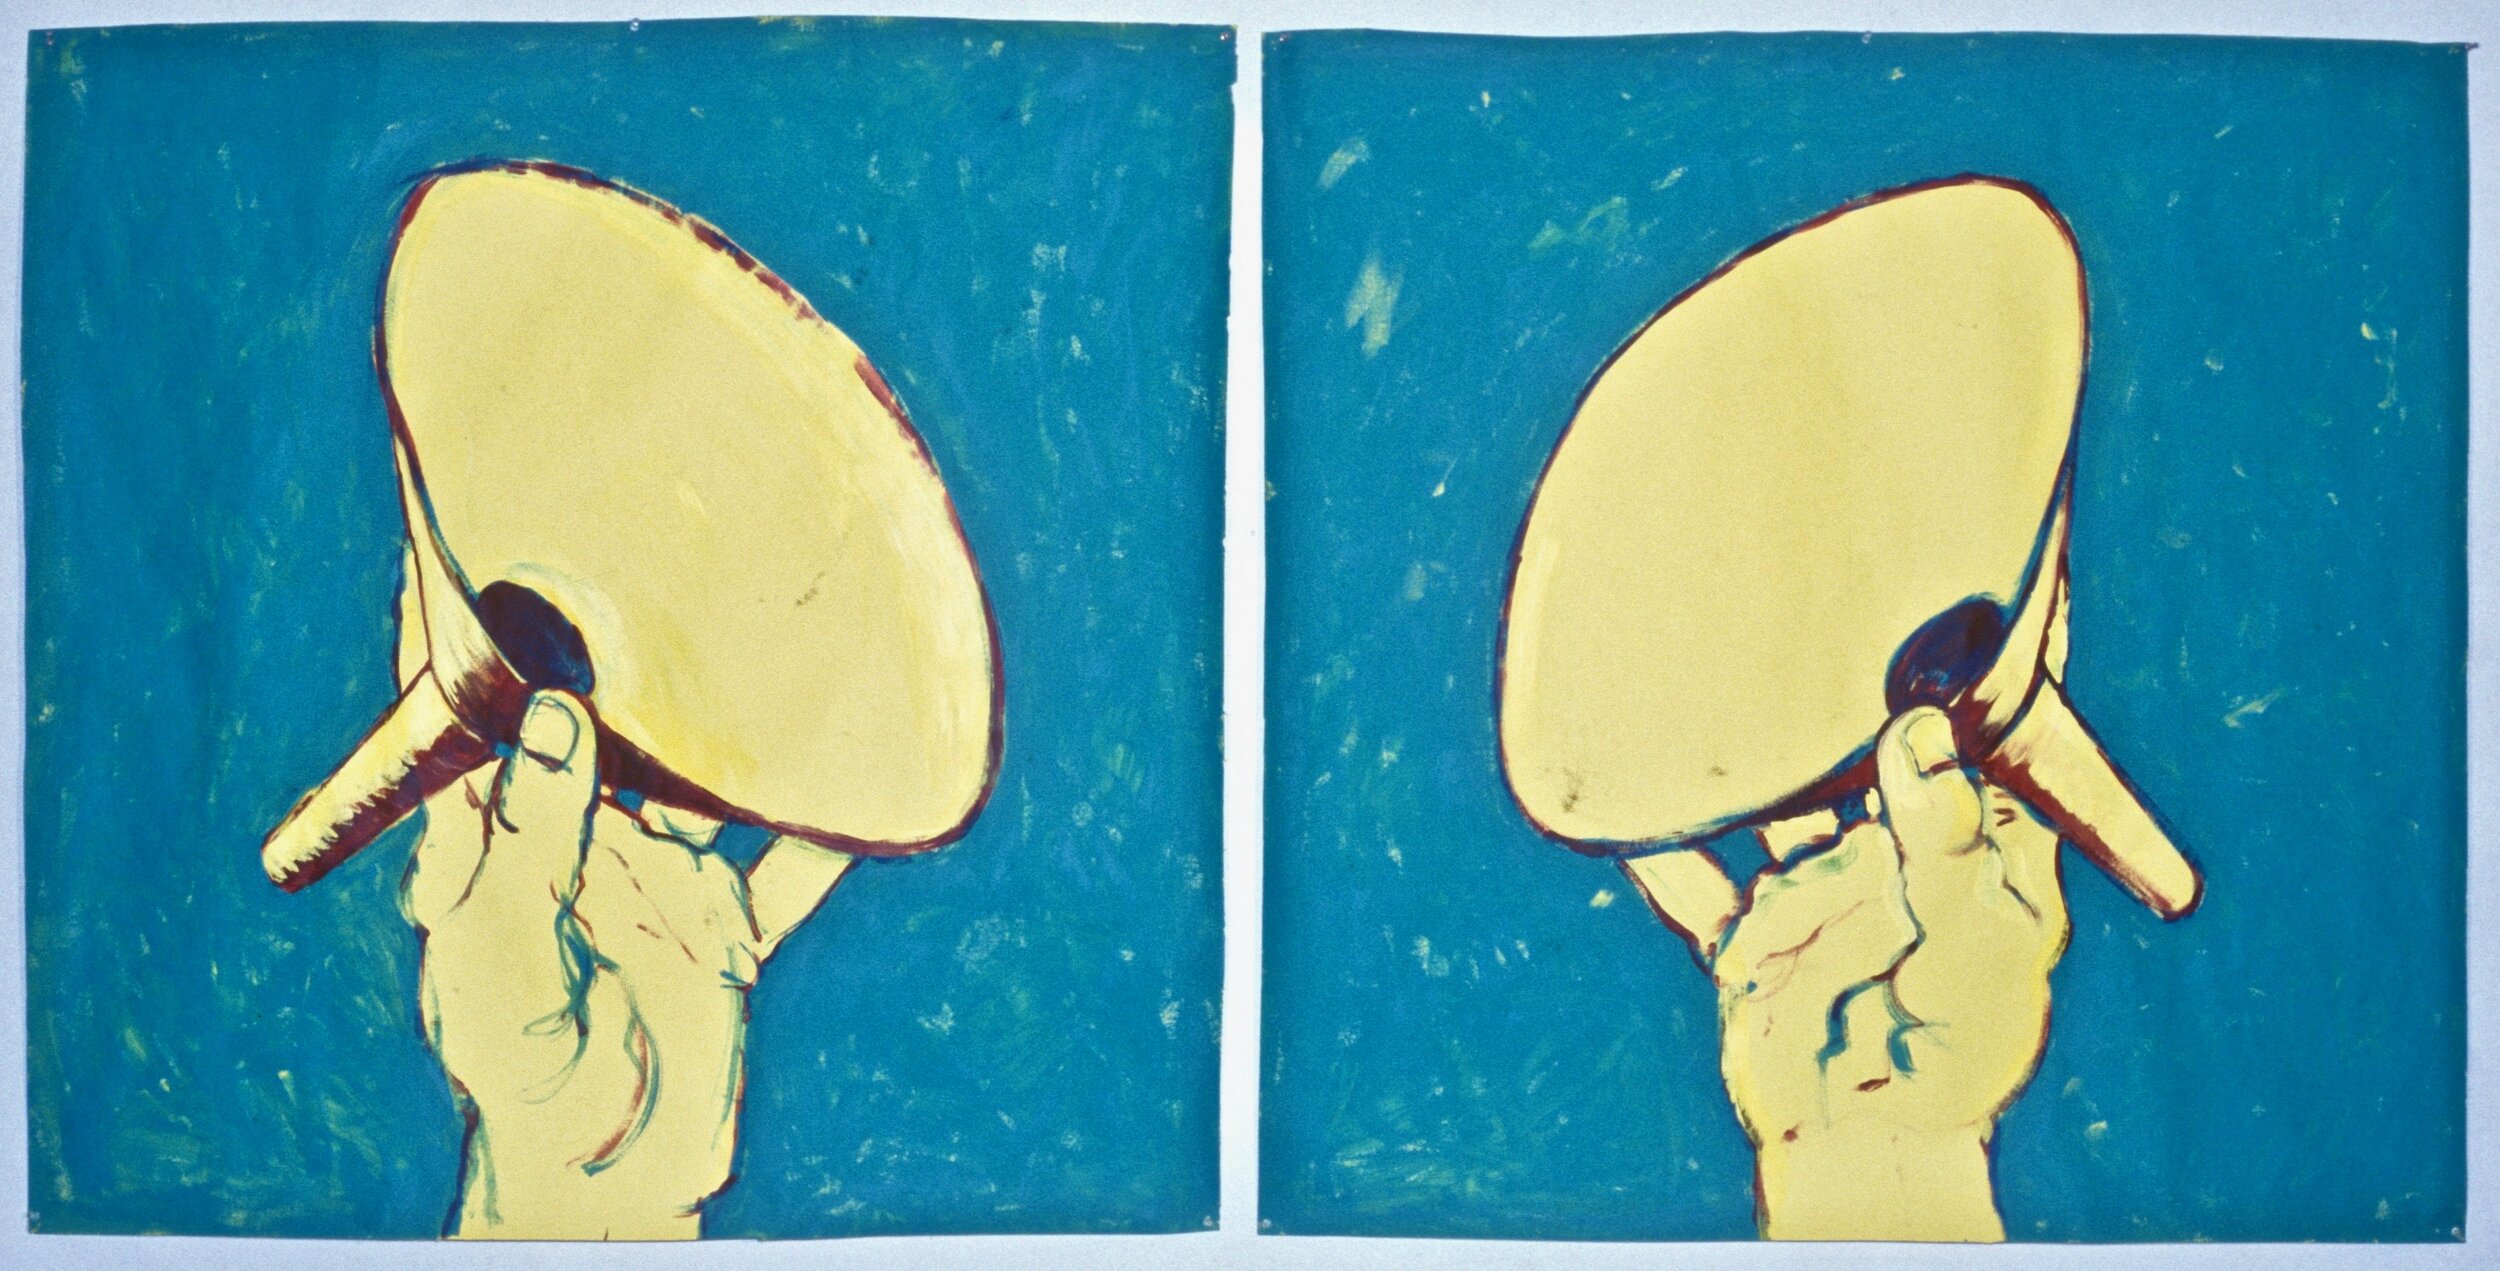 Untitled diptych, 1999